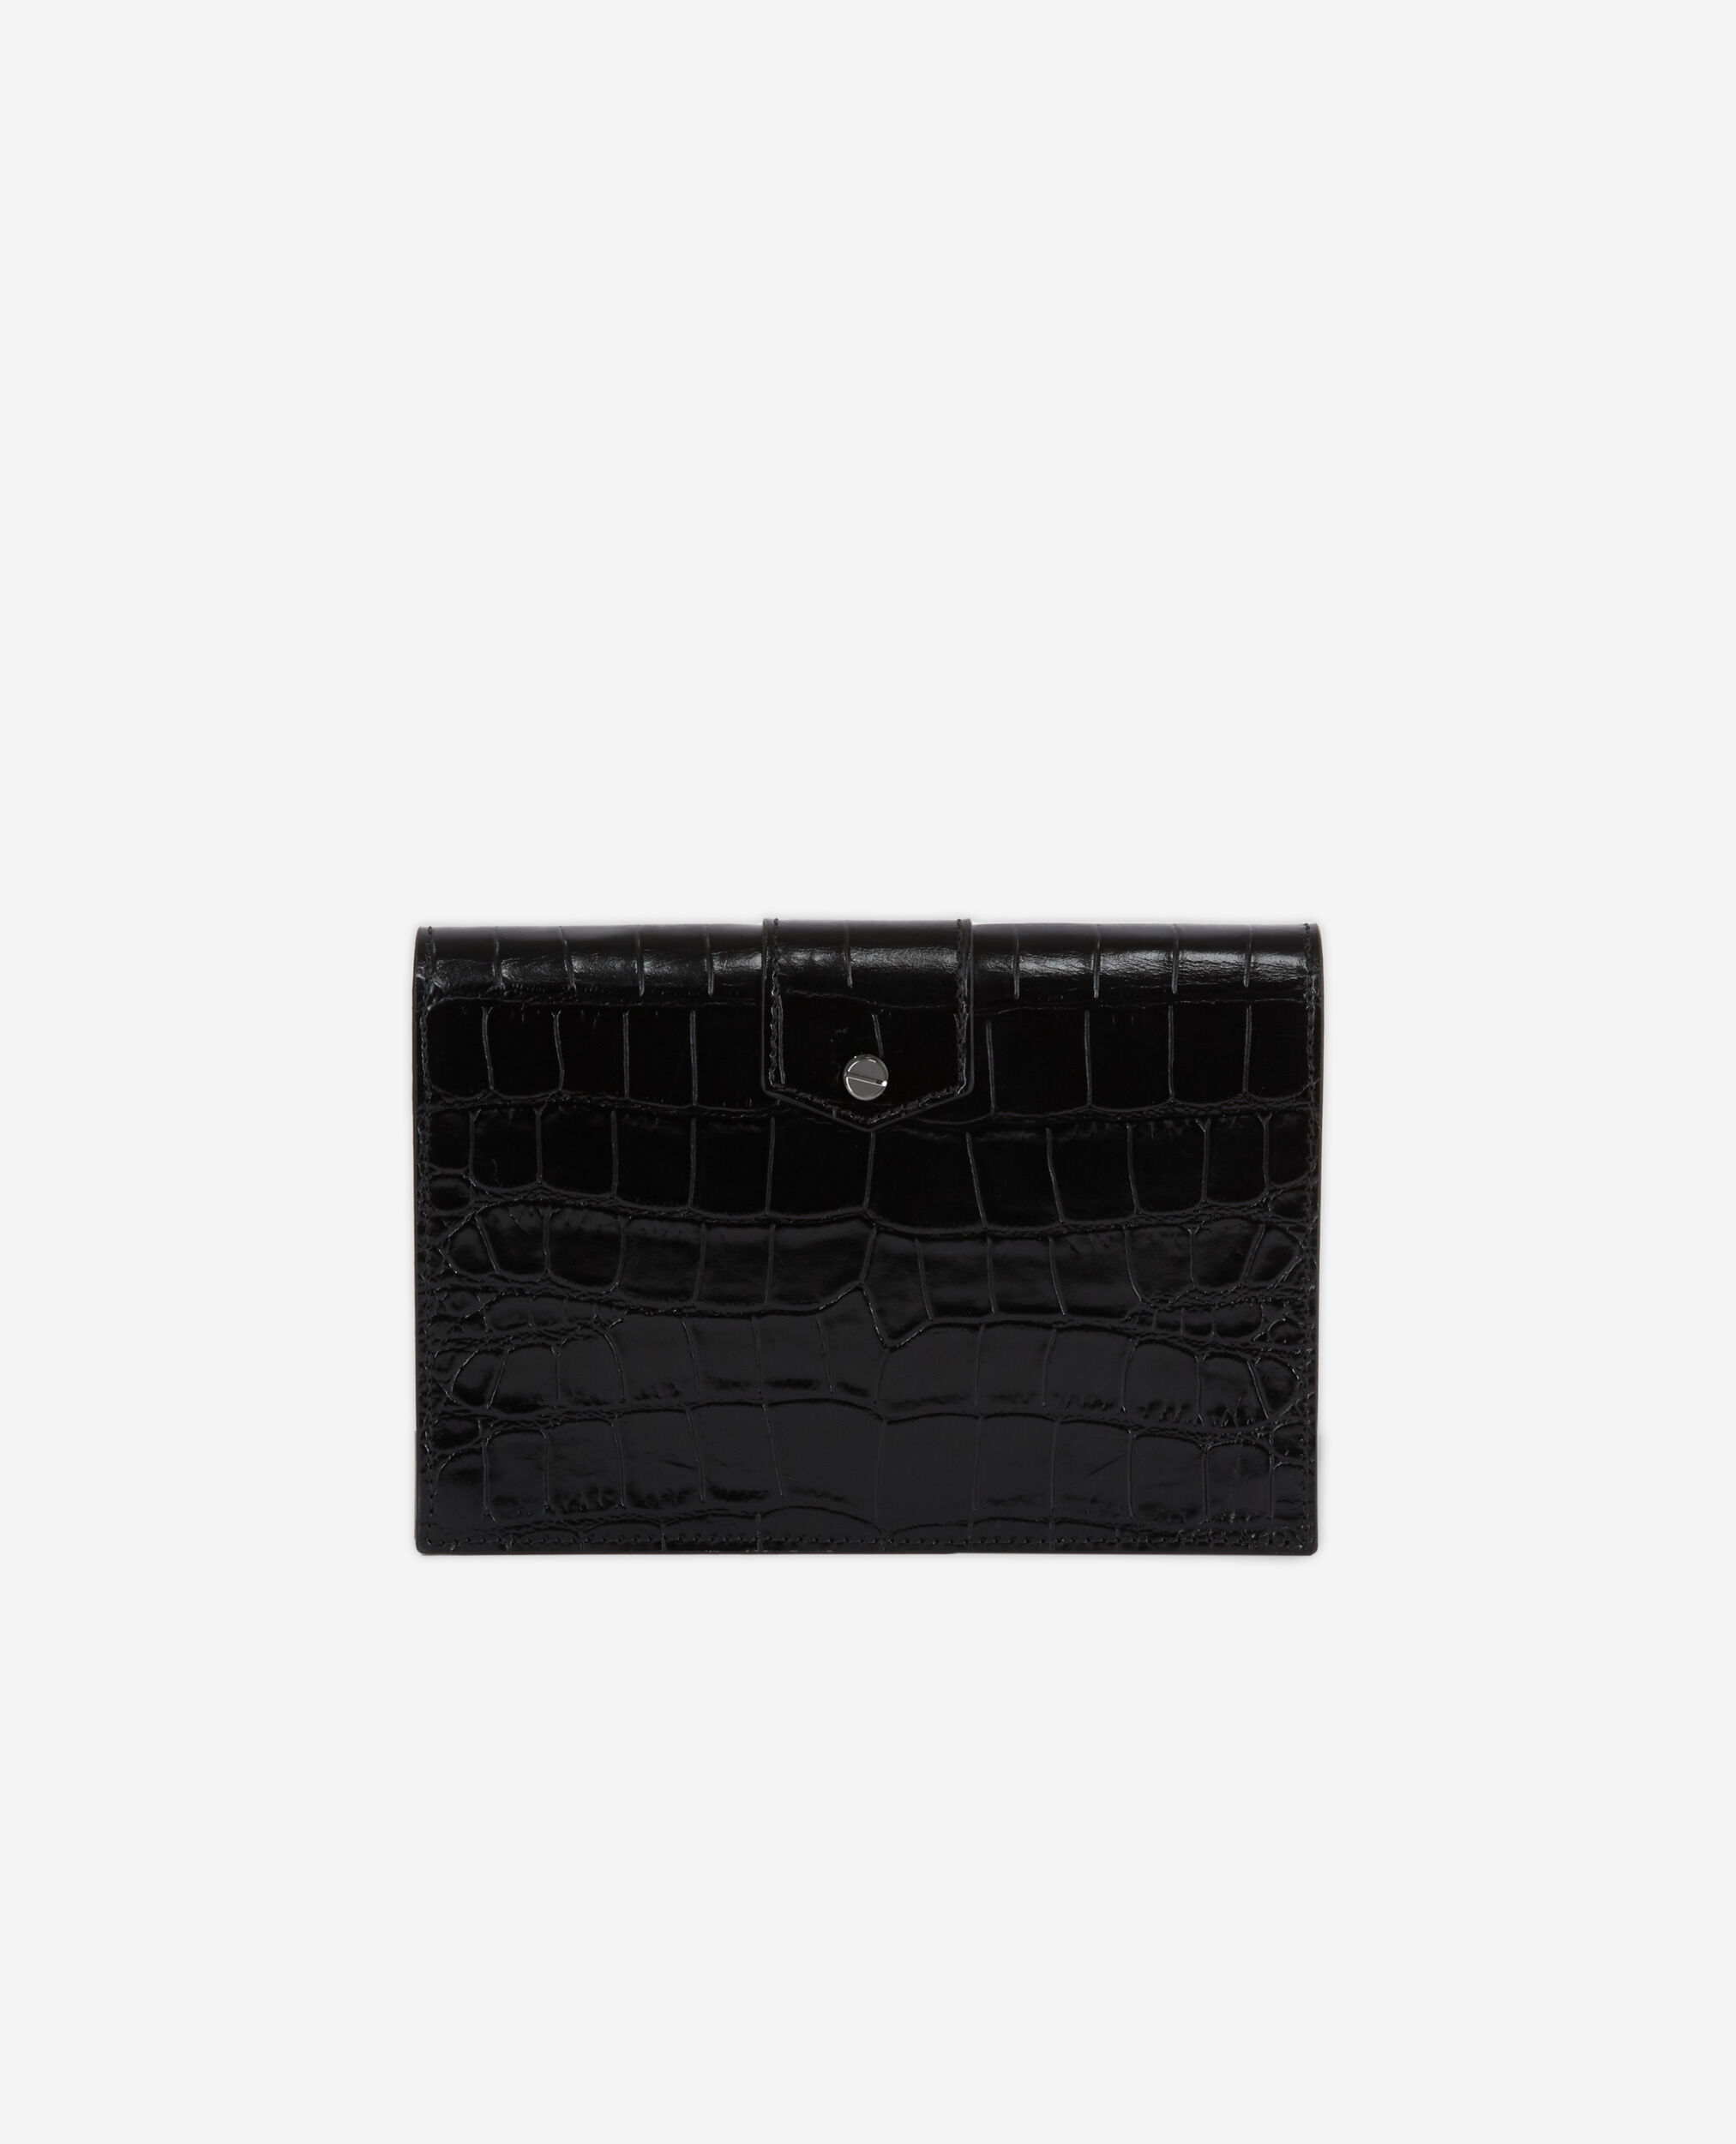 Medium Emily pouch in black leather, BLACK, hi-res image number null